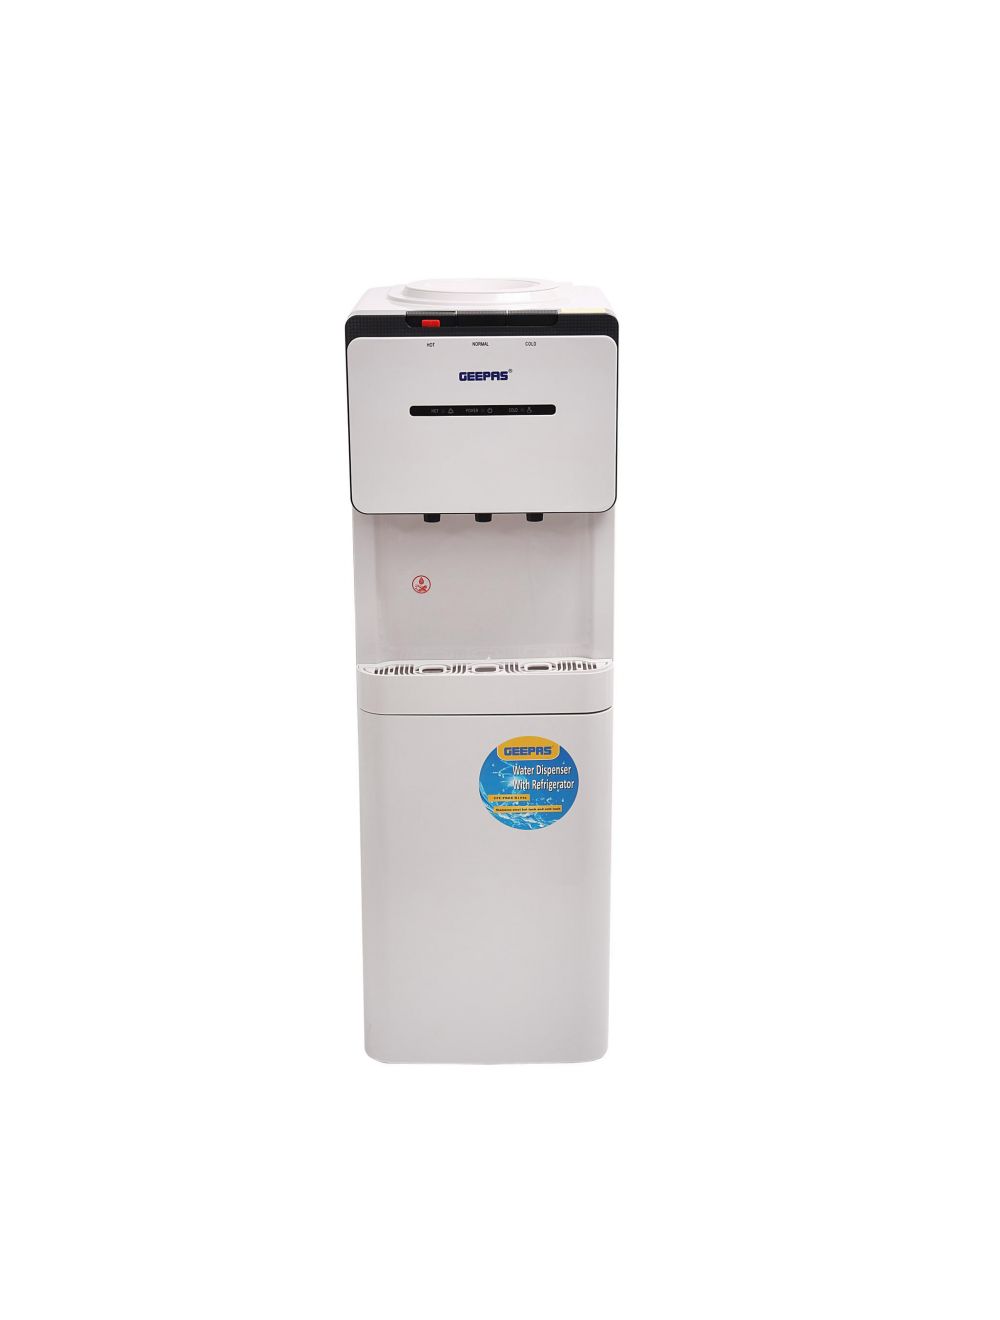 Geepas Water Dispenser Hot and Cold, GWD8355